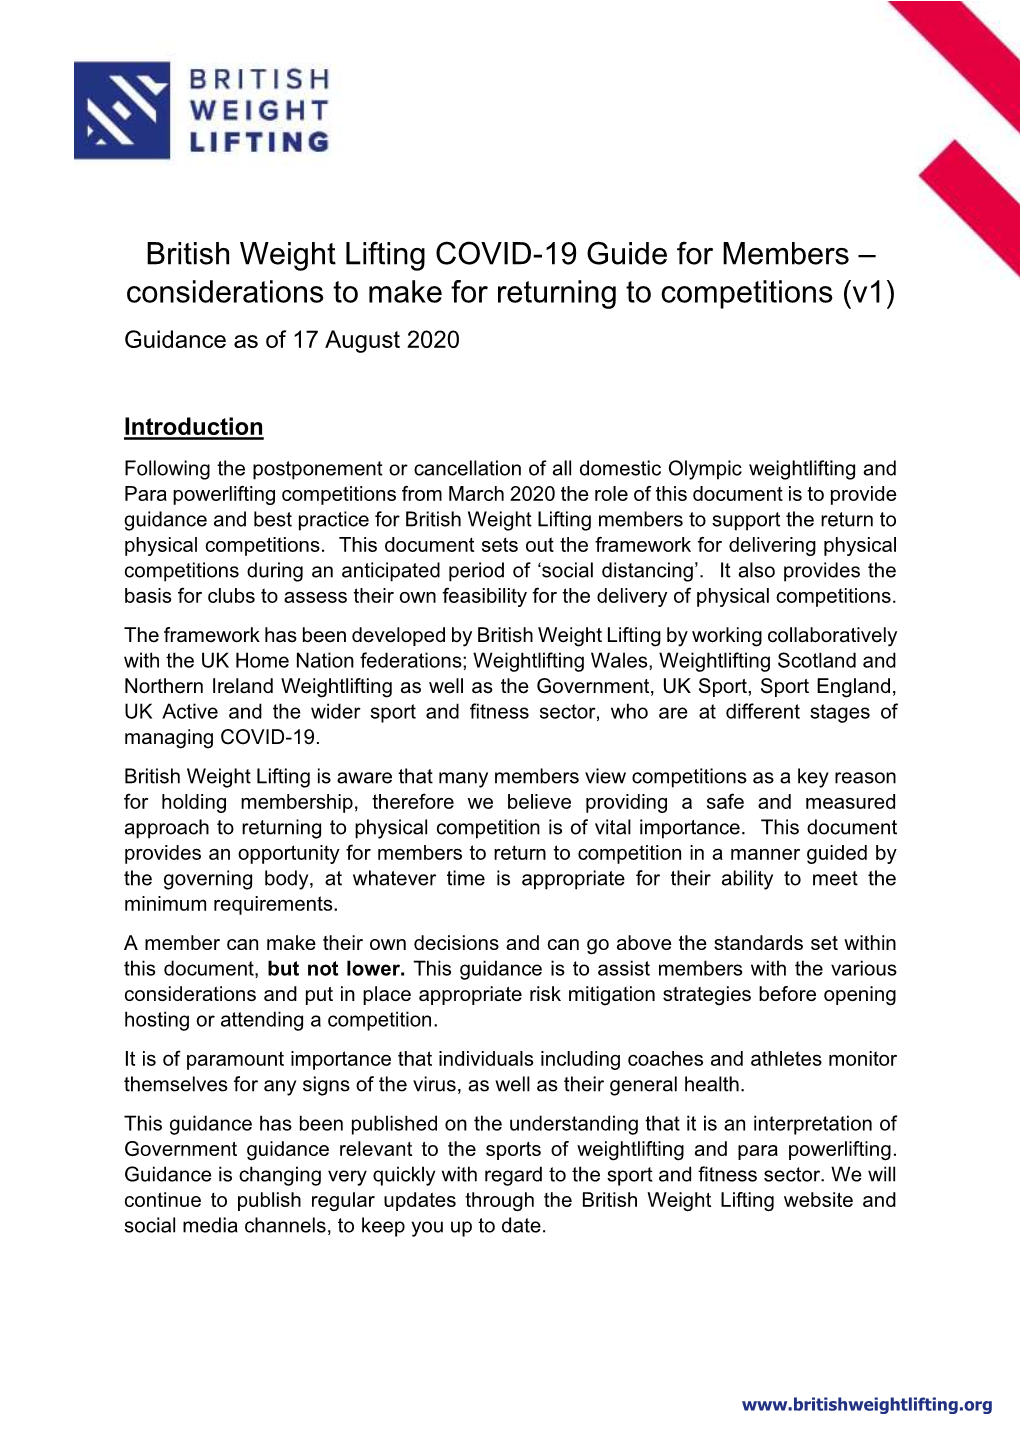 British Weight Lifting COVID-19 Guide for Members – Considerations to Make for Returning to Competitions (V1) Guidance As of 17 August 2020